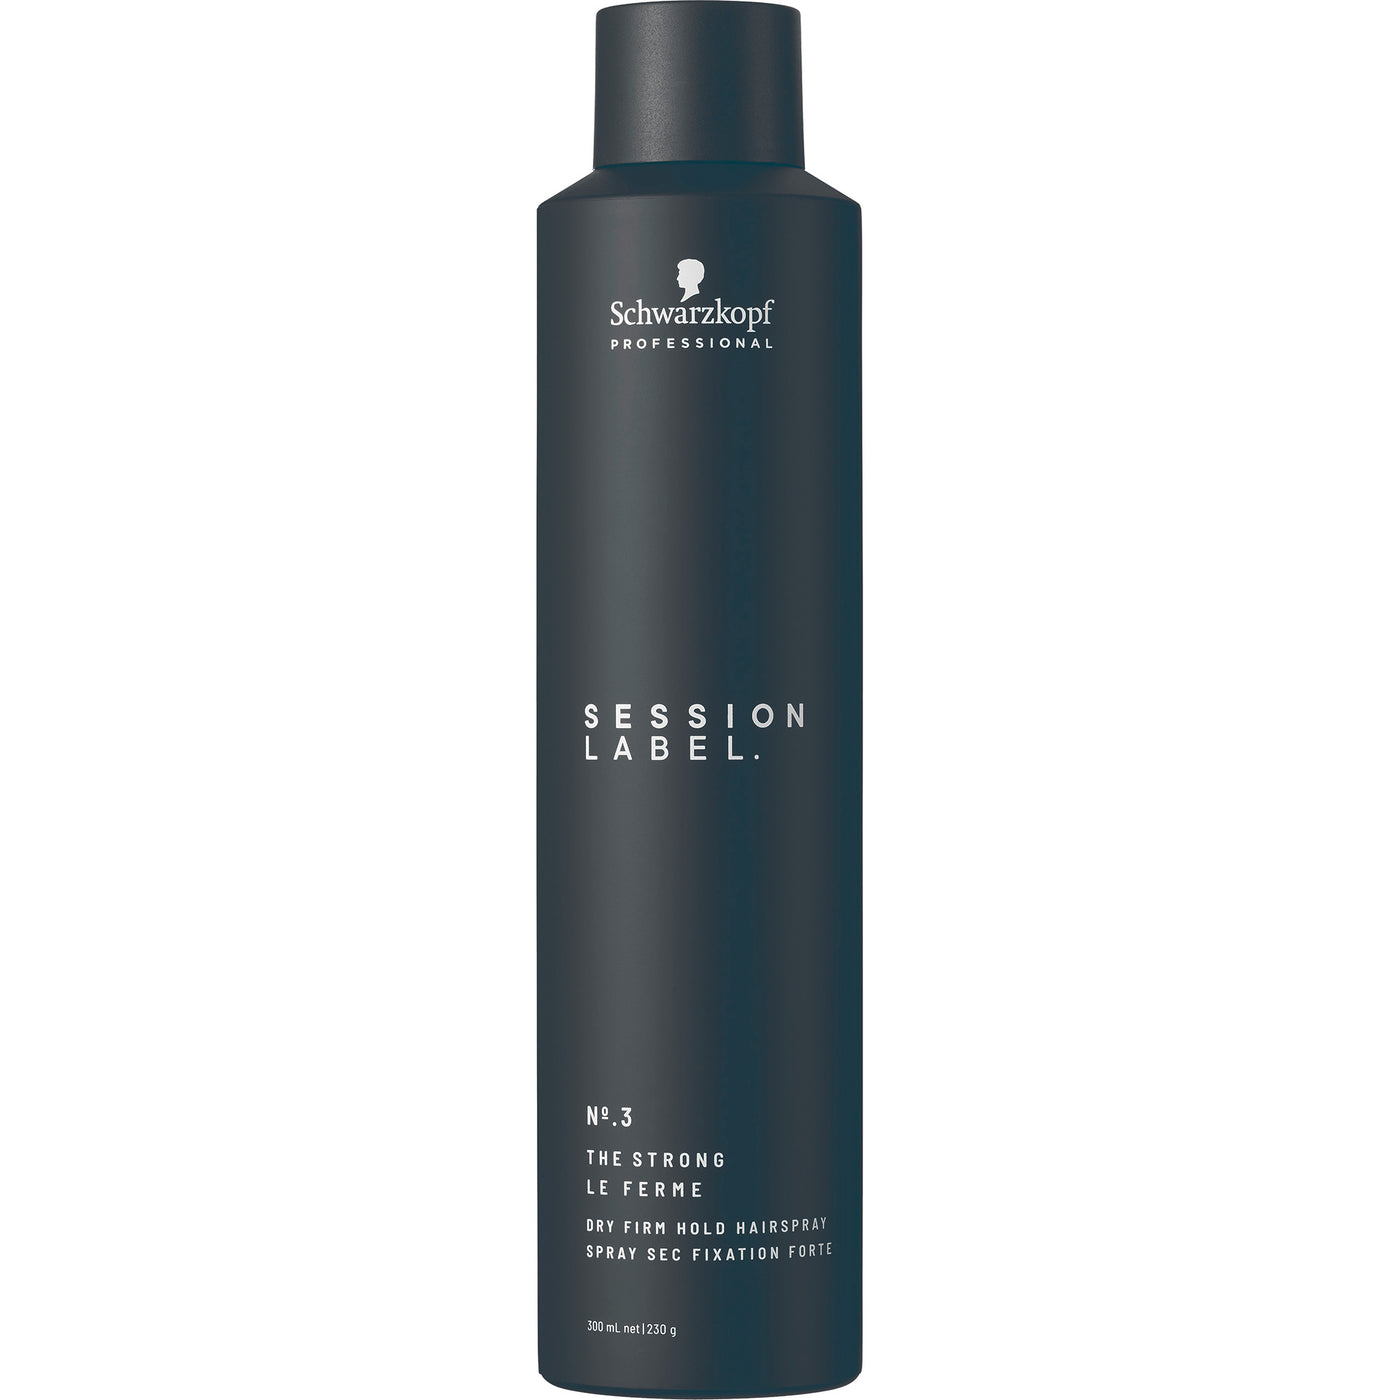 Schwarzkopf Professional Session Label The Strong (300ml)